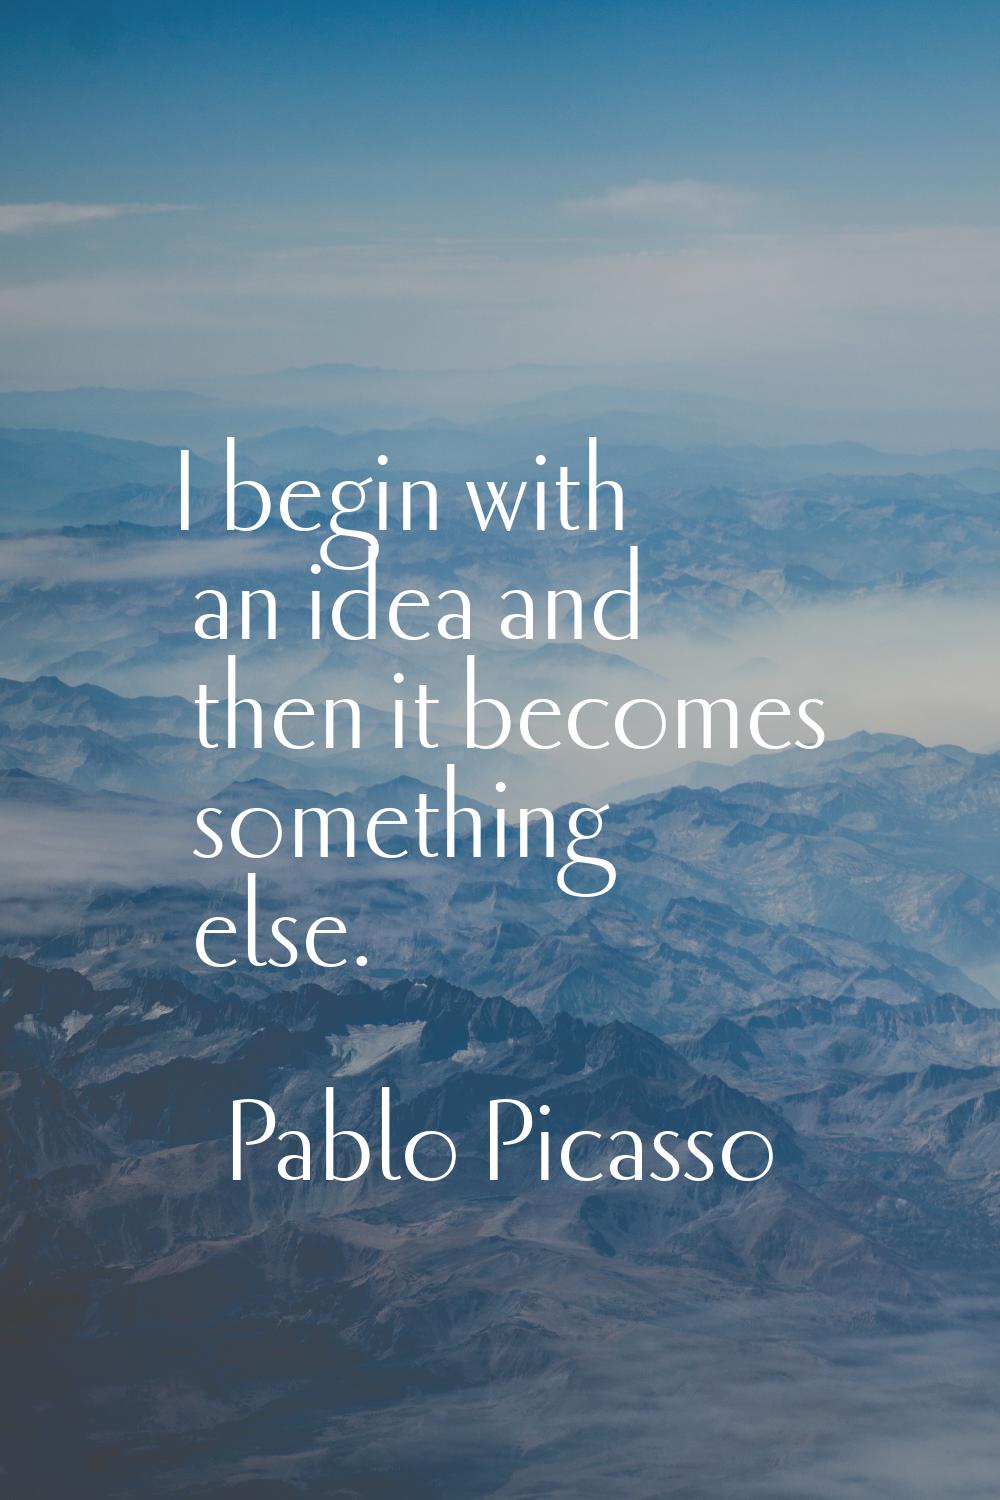 I begin with an idea and then it becomes something else.